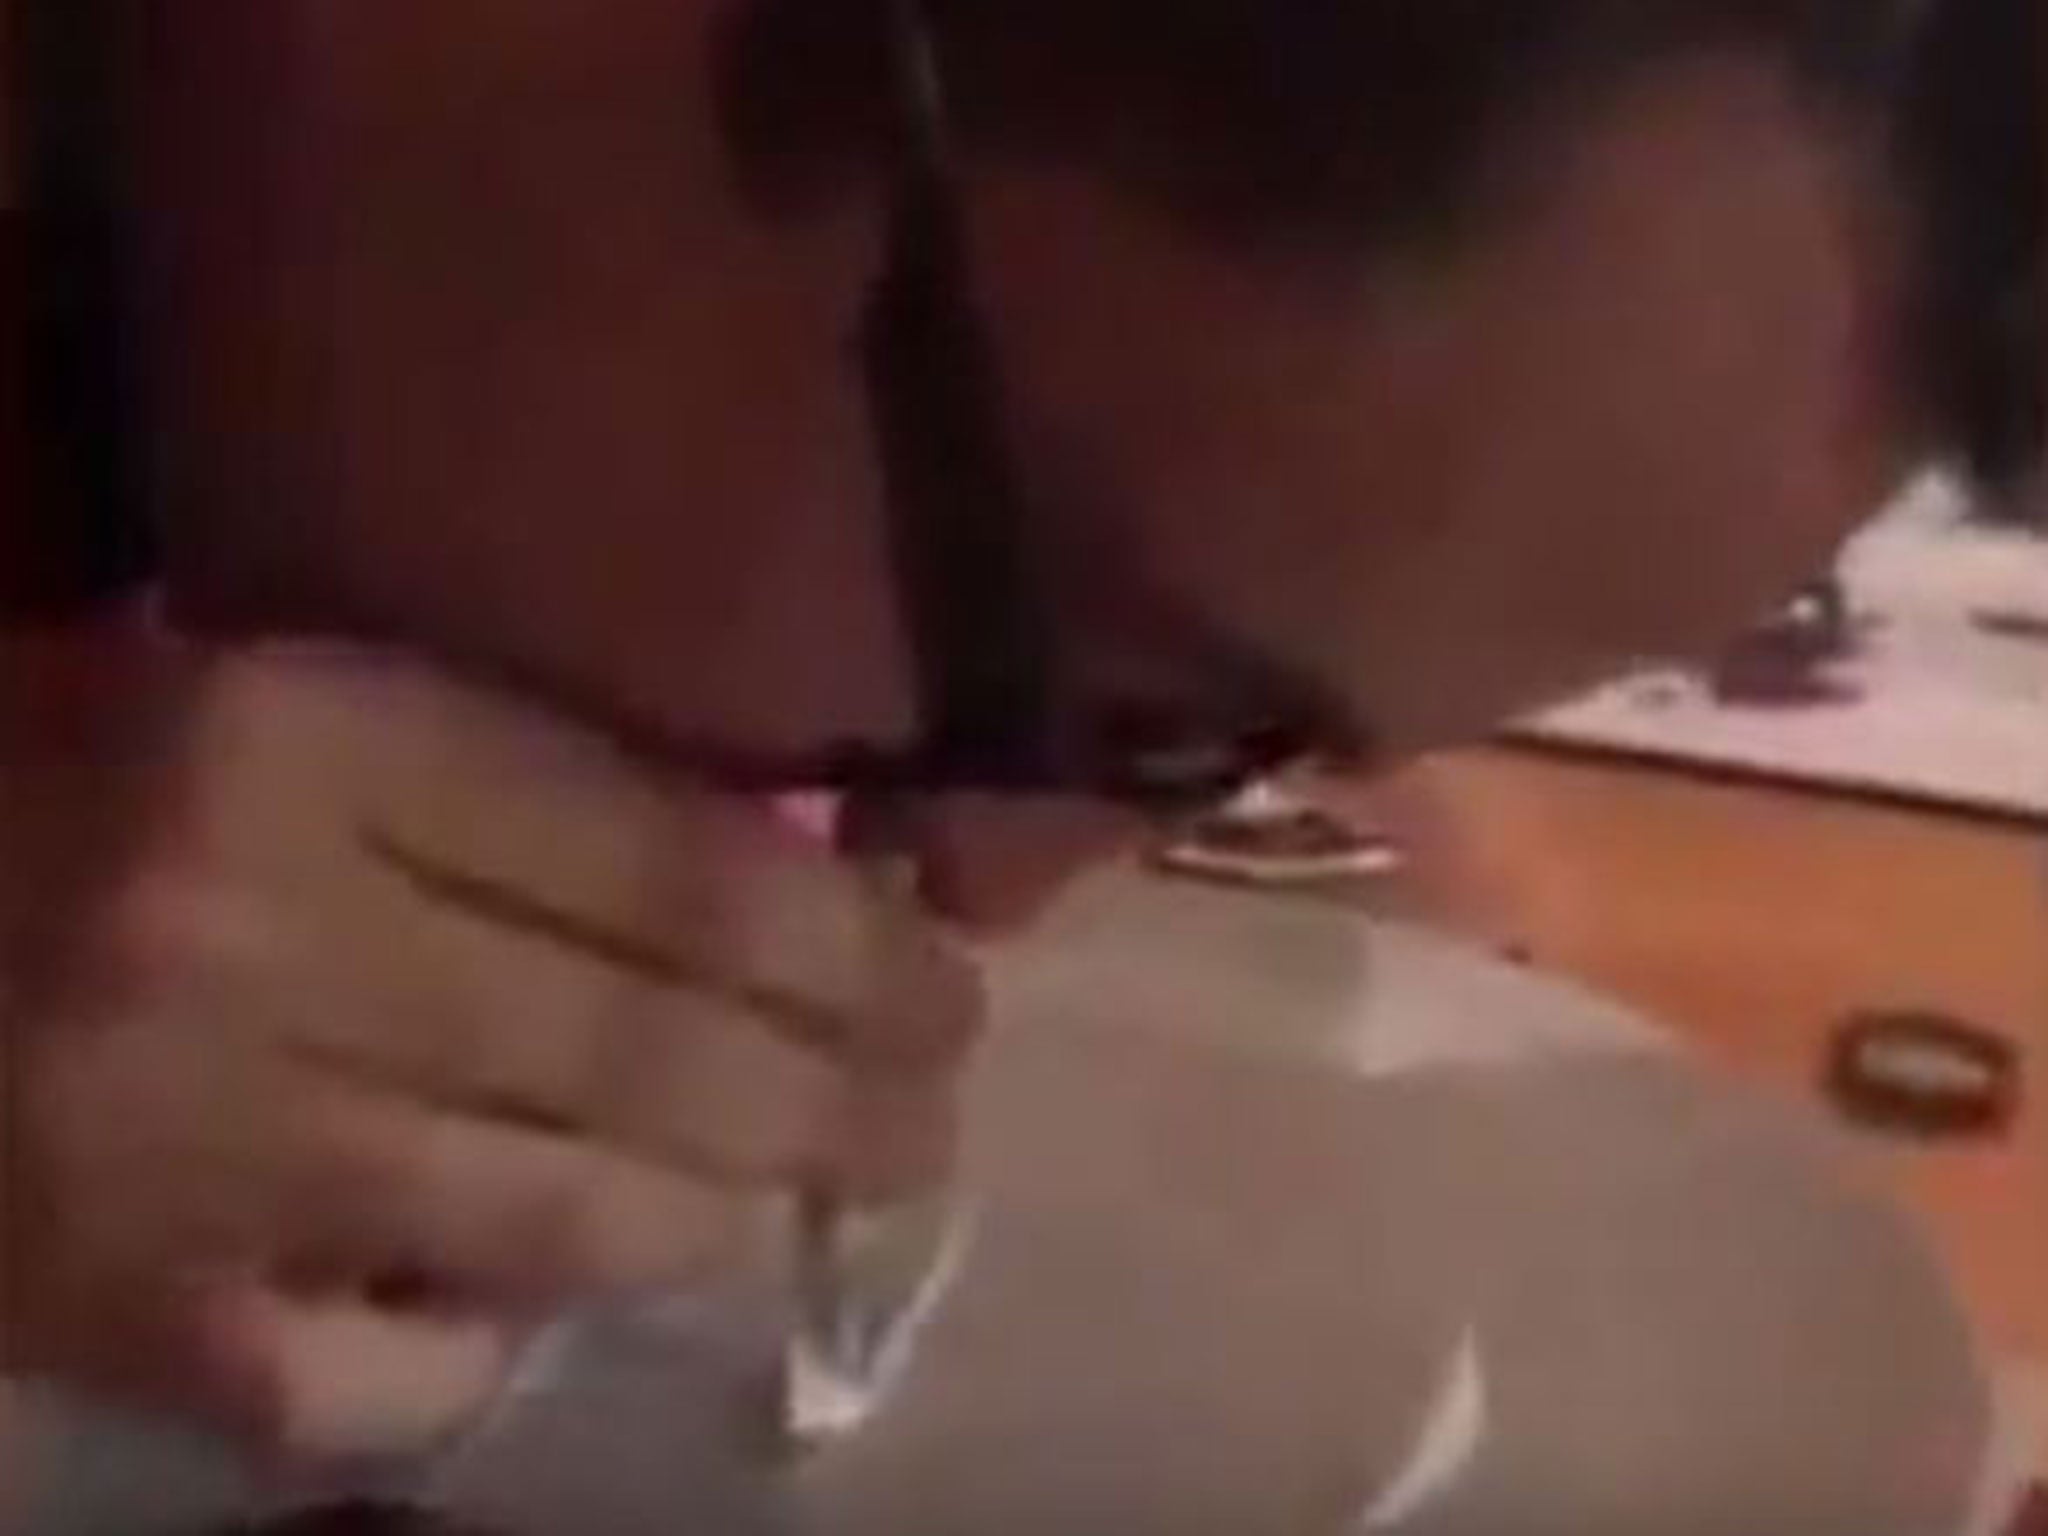 Video footage of Father Stephen Crossan snorting a line of cocaine, obtained by the Sun on Sunday